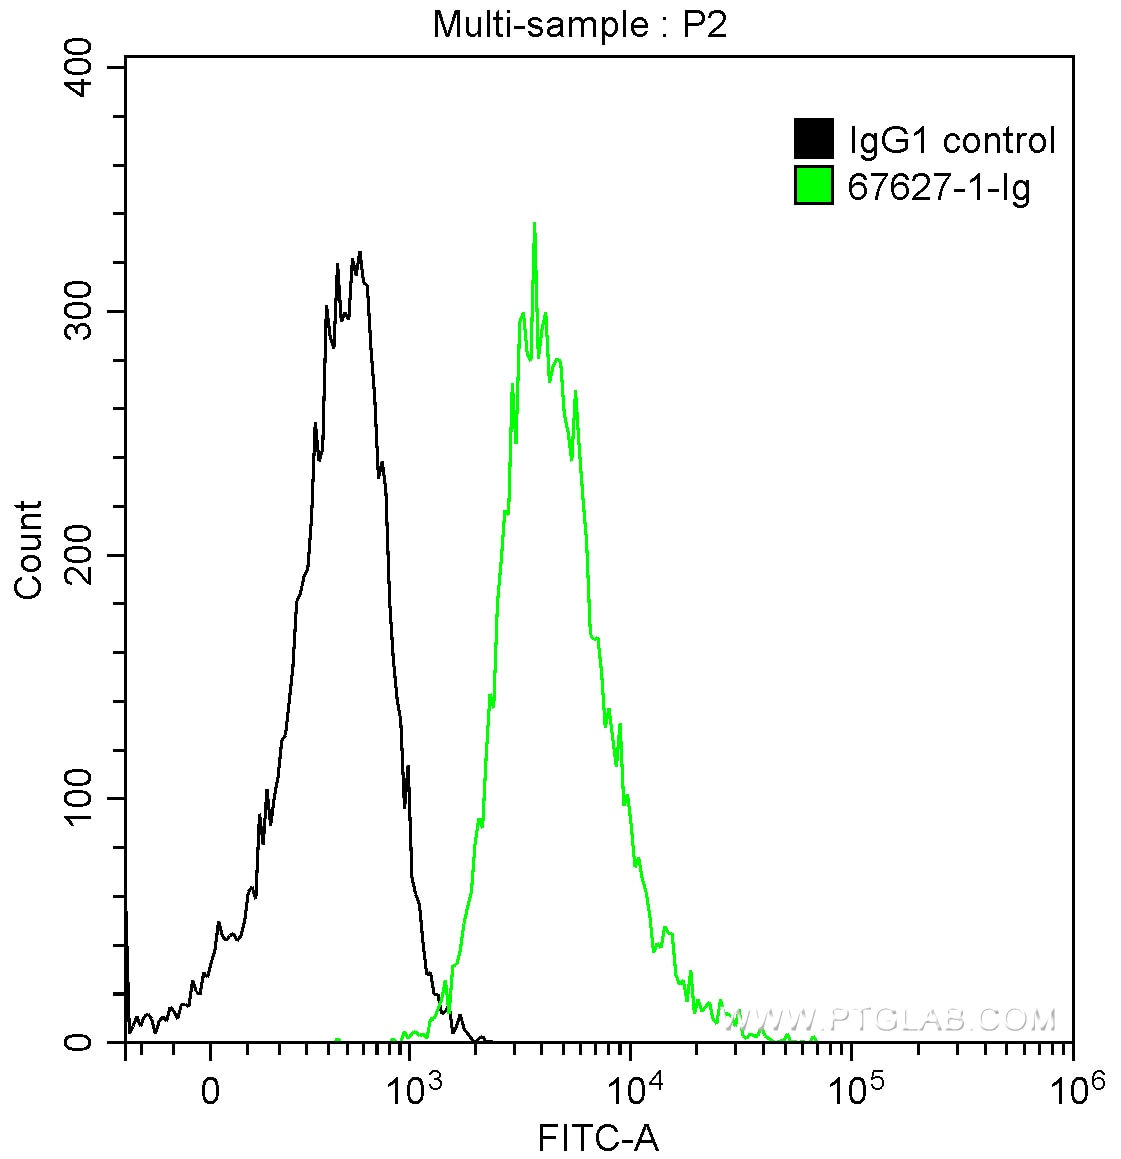 Flow cytometry (FC) experiment of Ramos cells using CD24 Monoclonal antibody (67627-1-Ig)